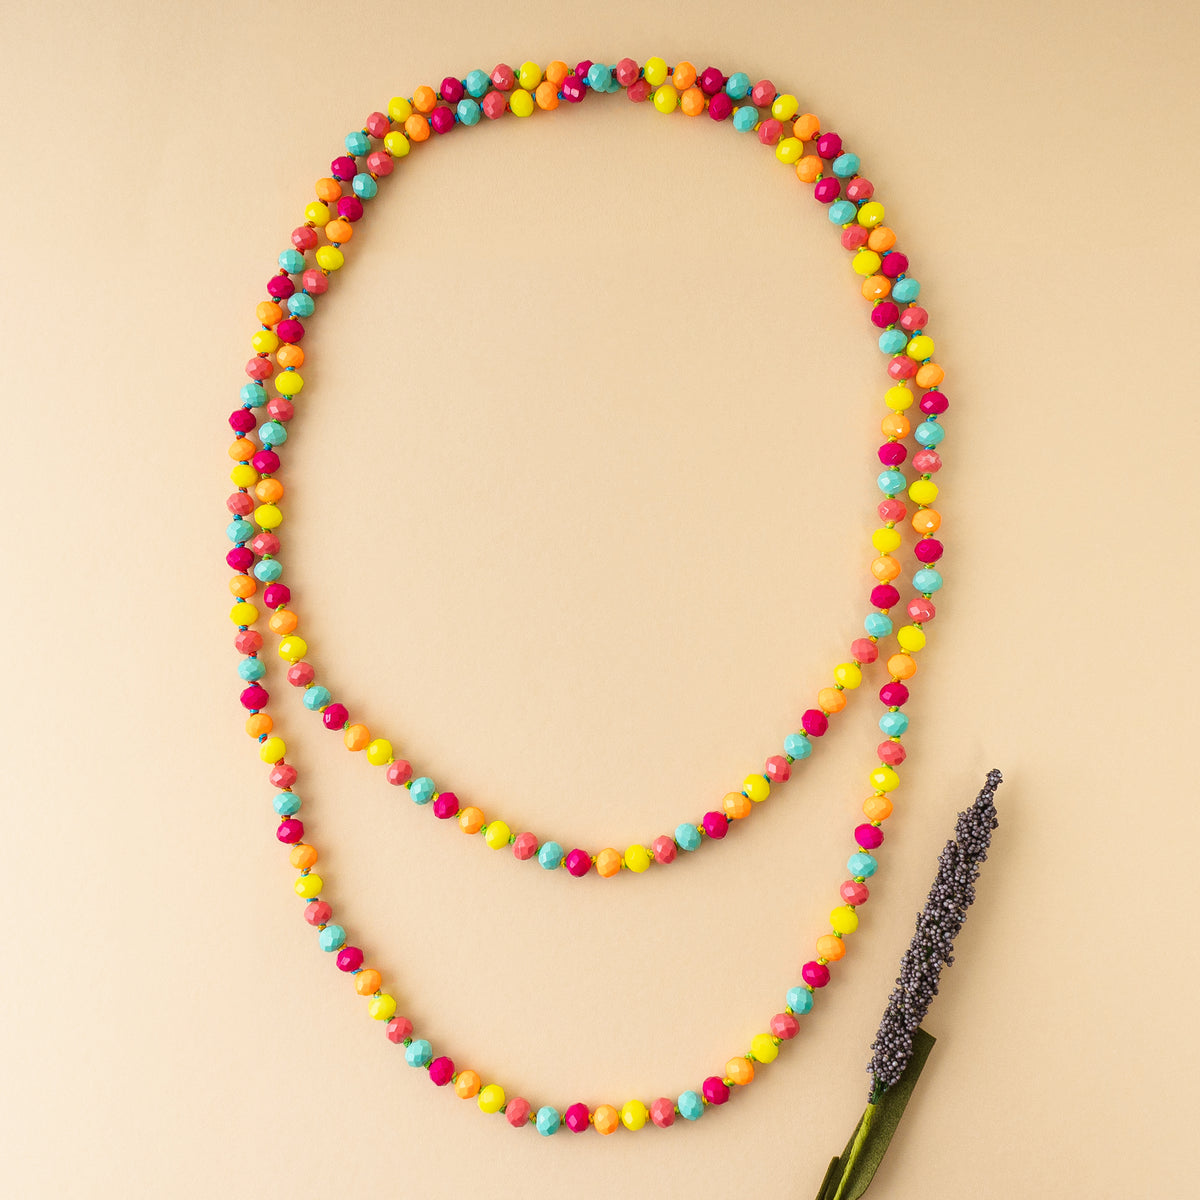 72028-76 -  Crystal Beaded Necklace - Multi - Fashion Jewelry Wholesale